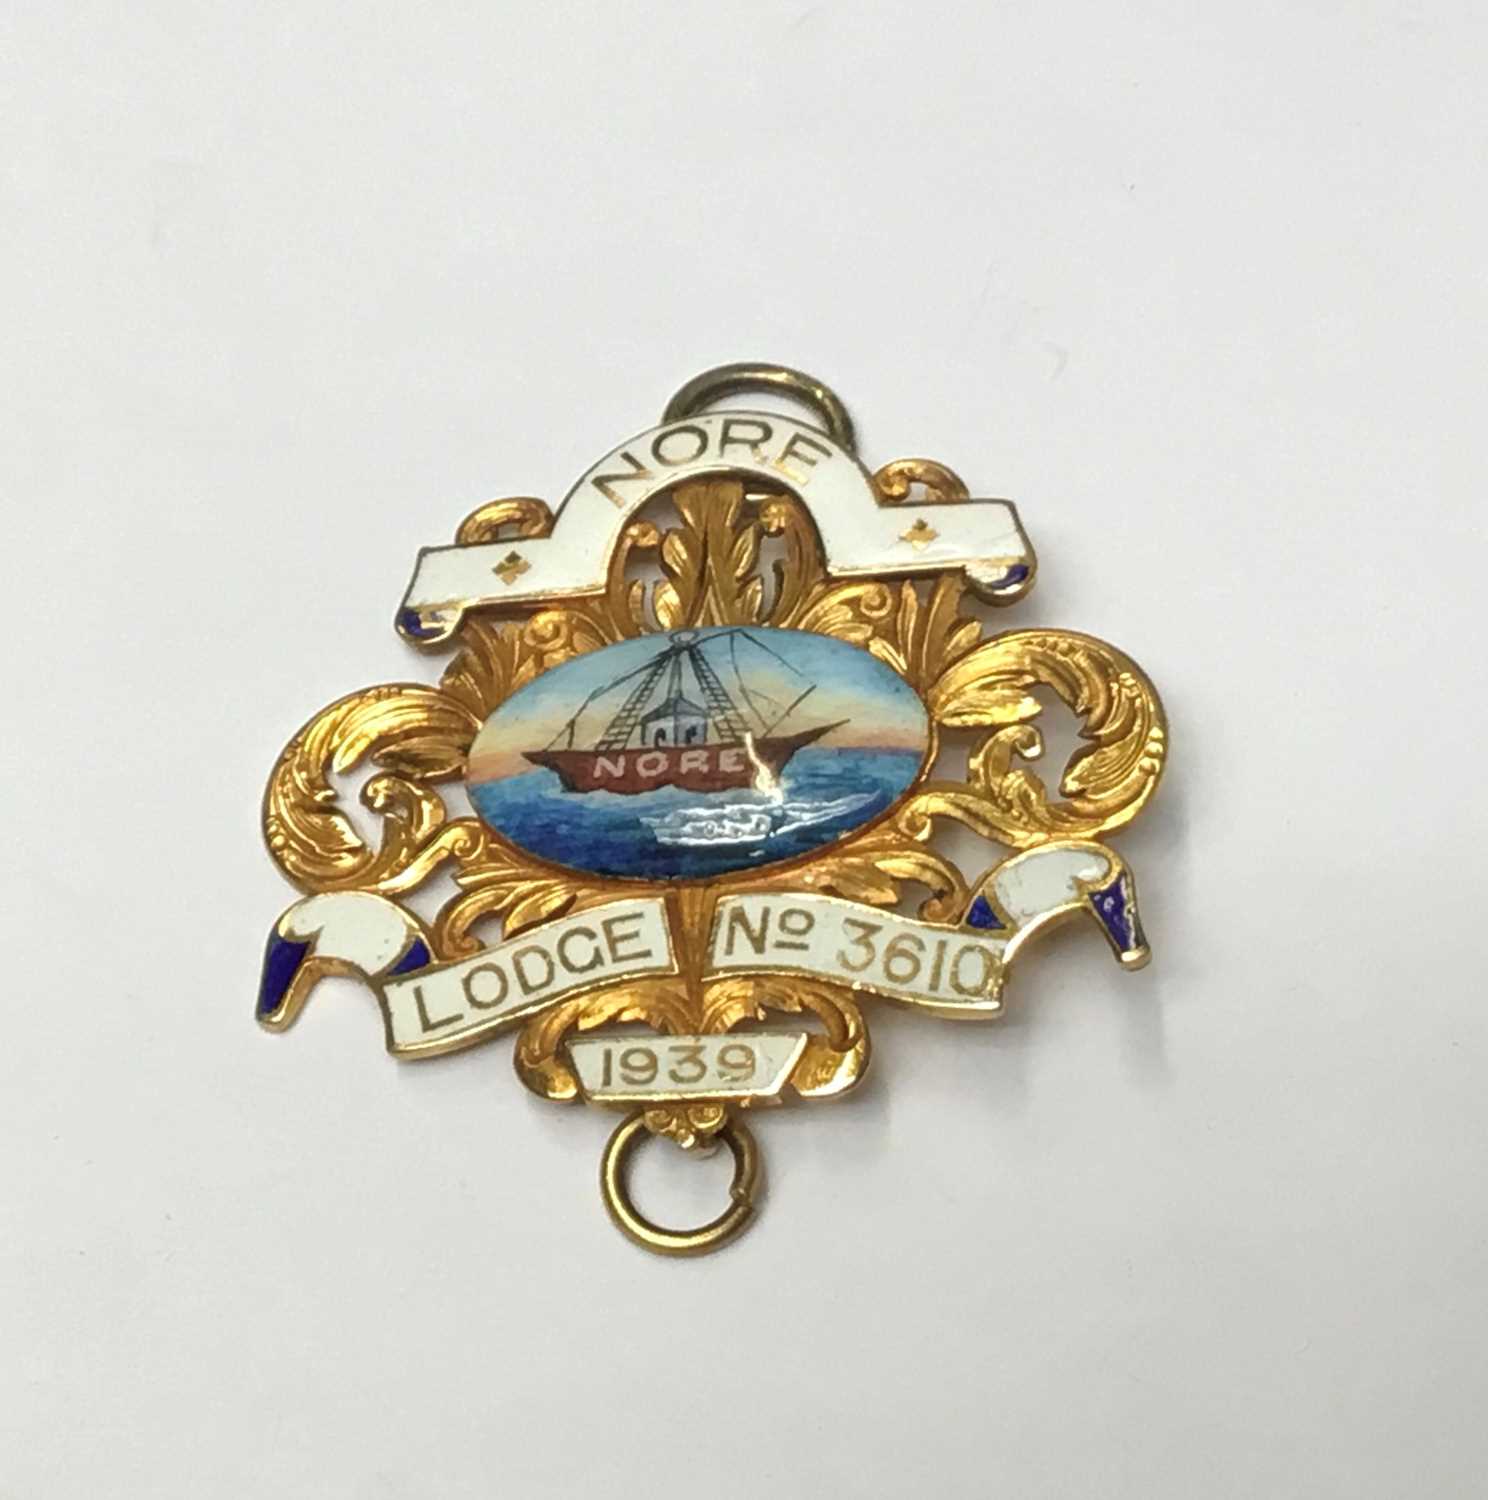 Lot 178 - Good quality yellow metal and enamel Masonic Jewel, Nore Lodge No. 3610, 1939. Measures 47mm wide.